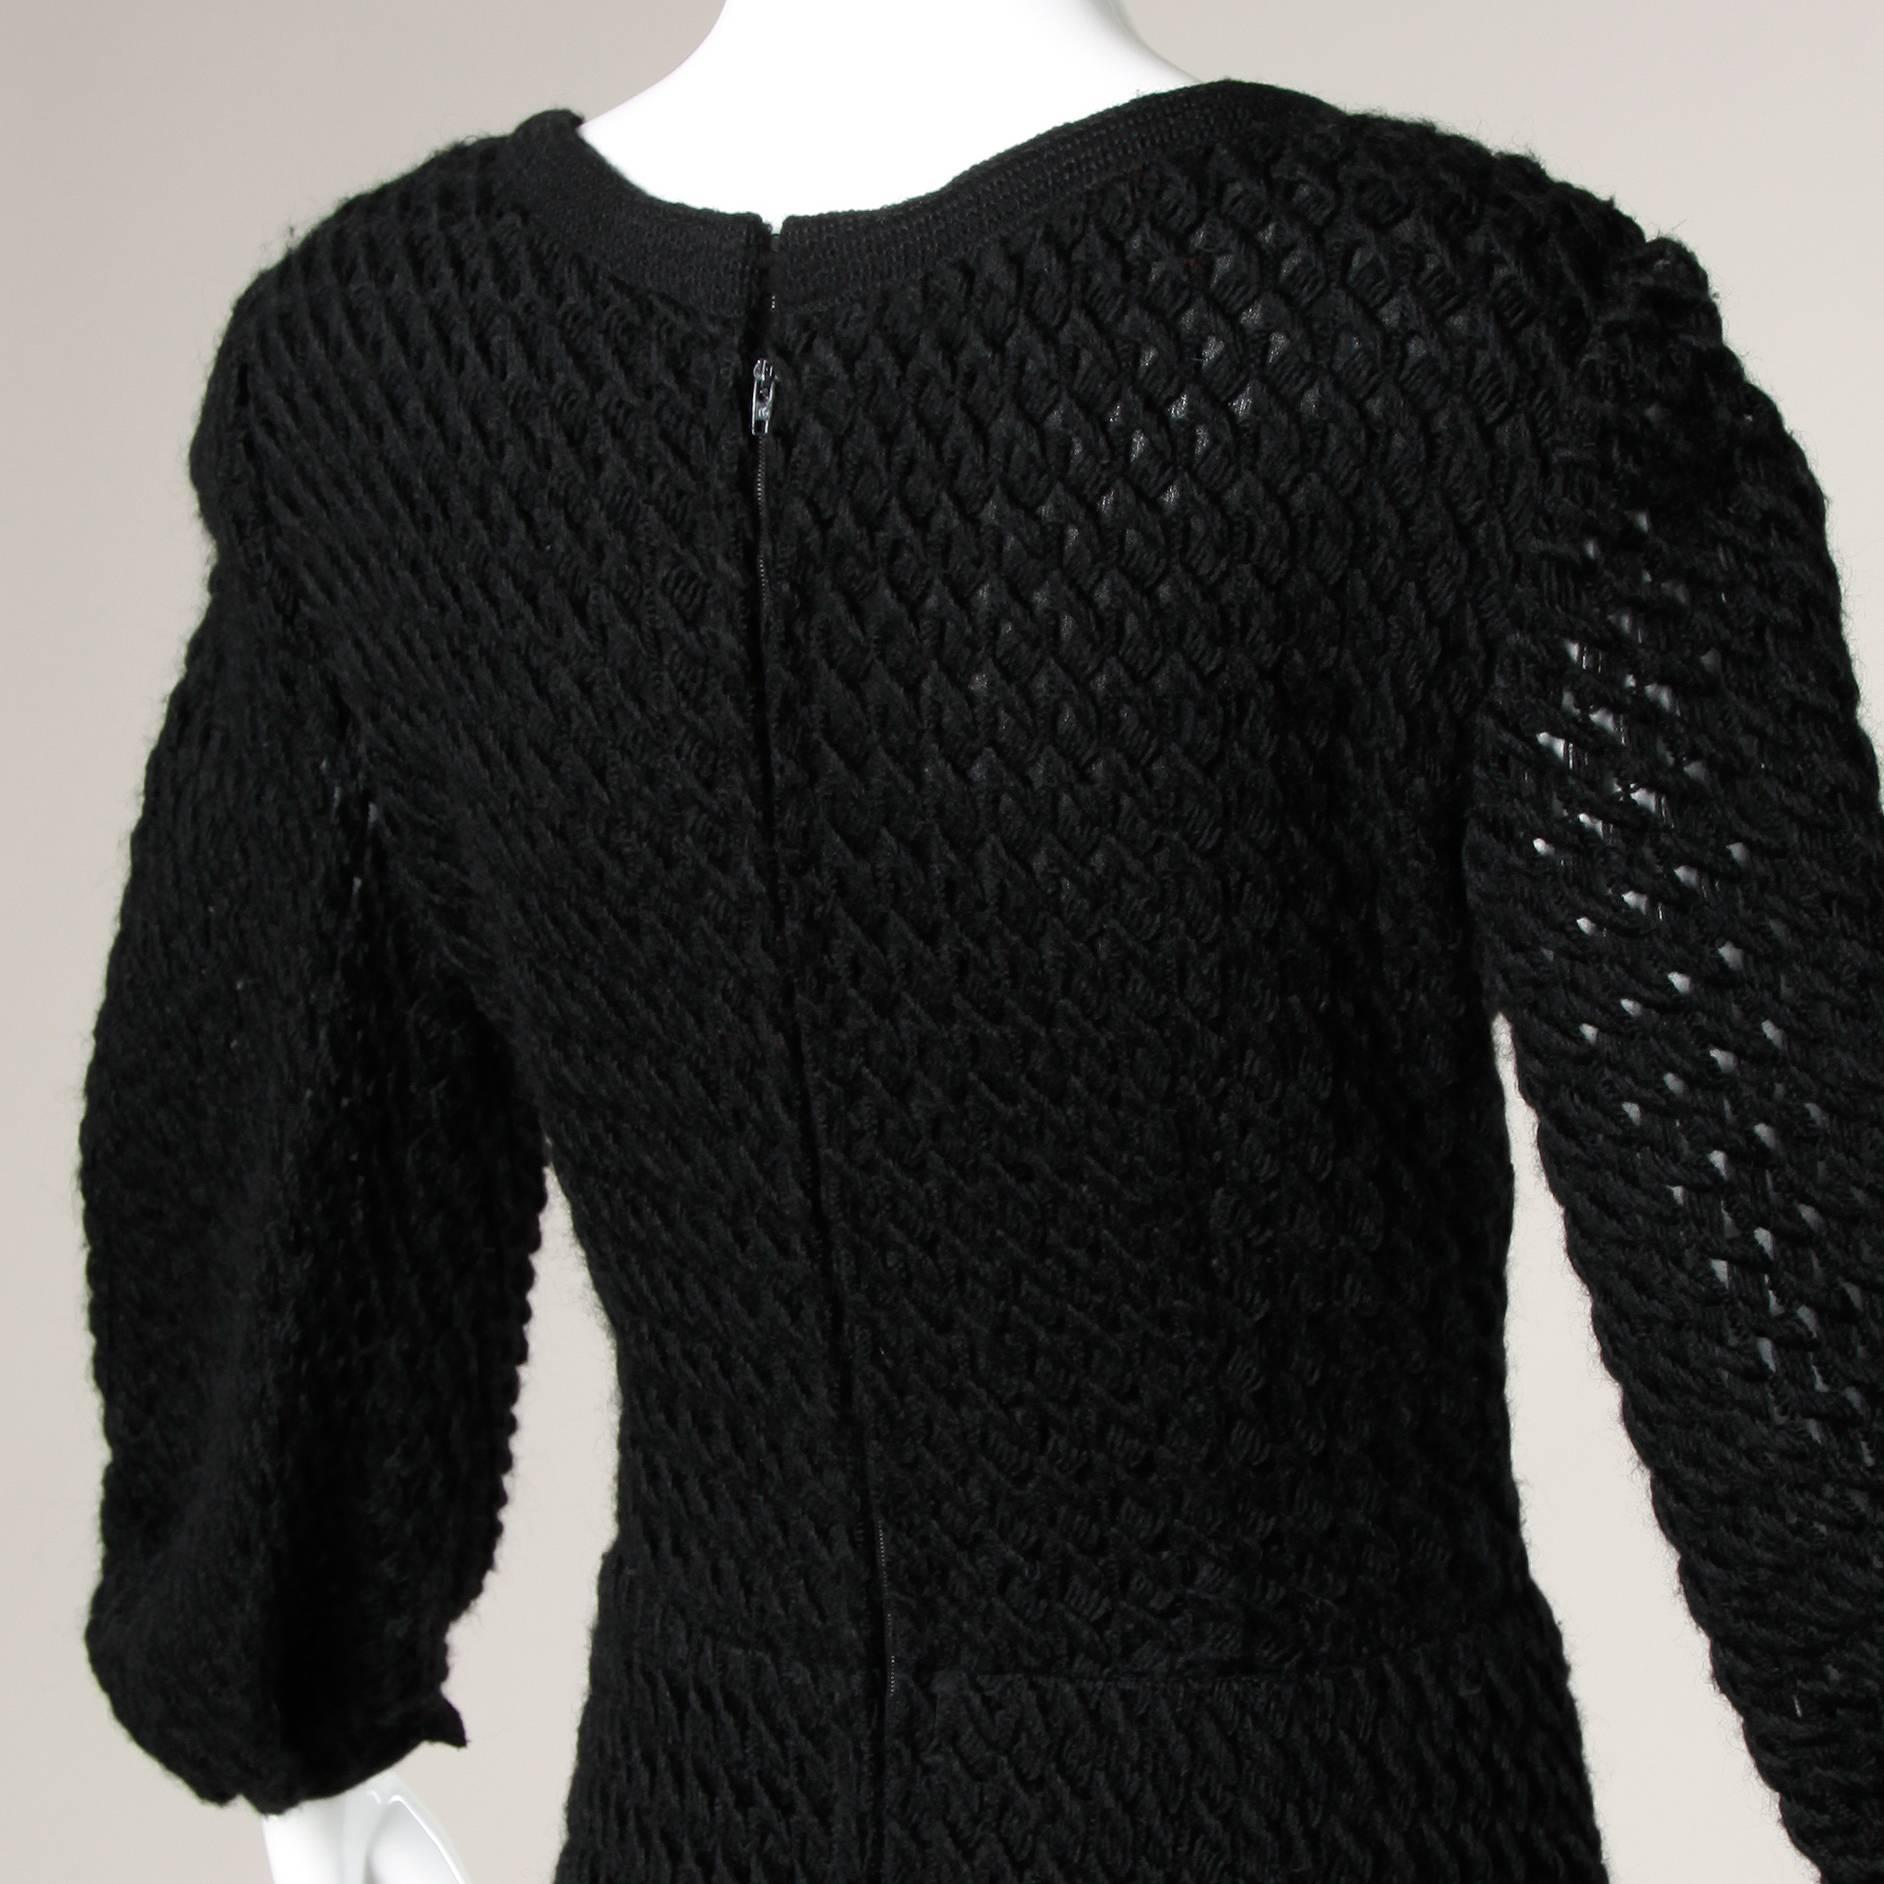 Cardinali Black Wool and Silk Couture Crochet Dress with Fringe Trim, 1960s 2